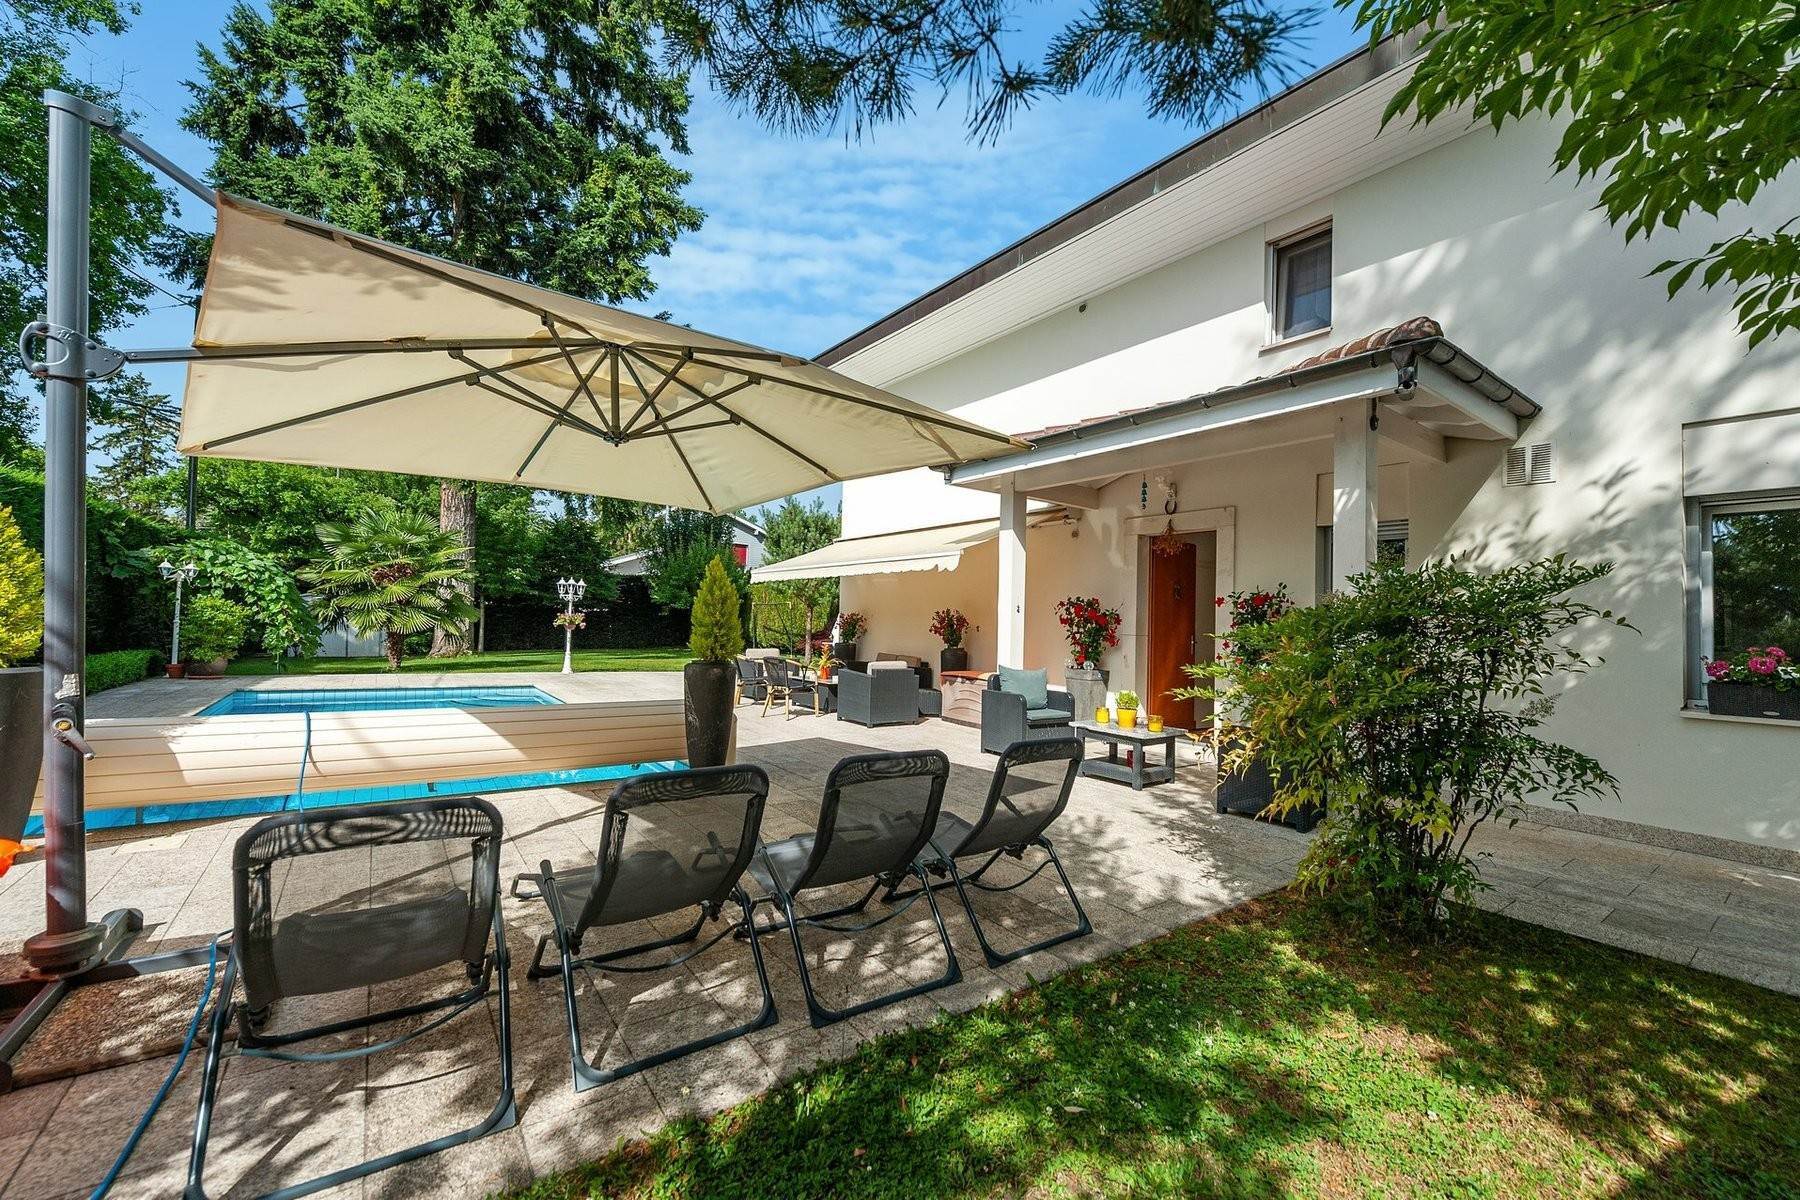 Property for Sale at Nice family house with pool Chêne-Bougeries Chene-Bougeries, Geneva 1224 Switzerland